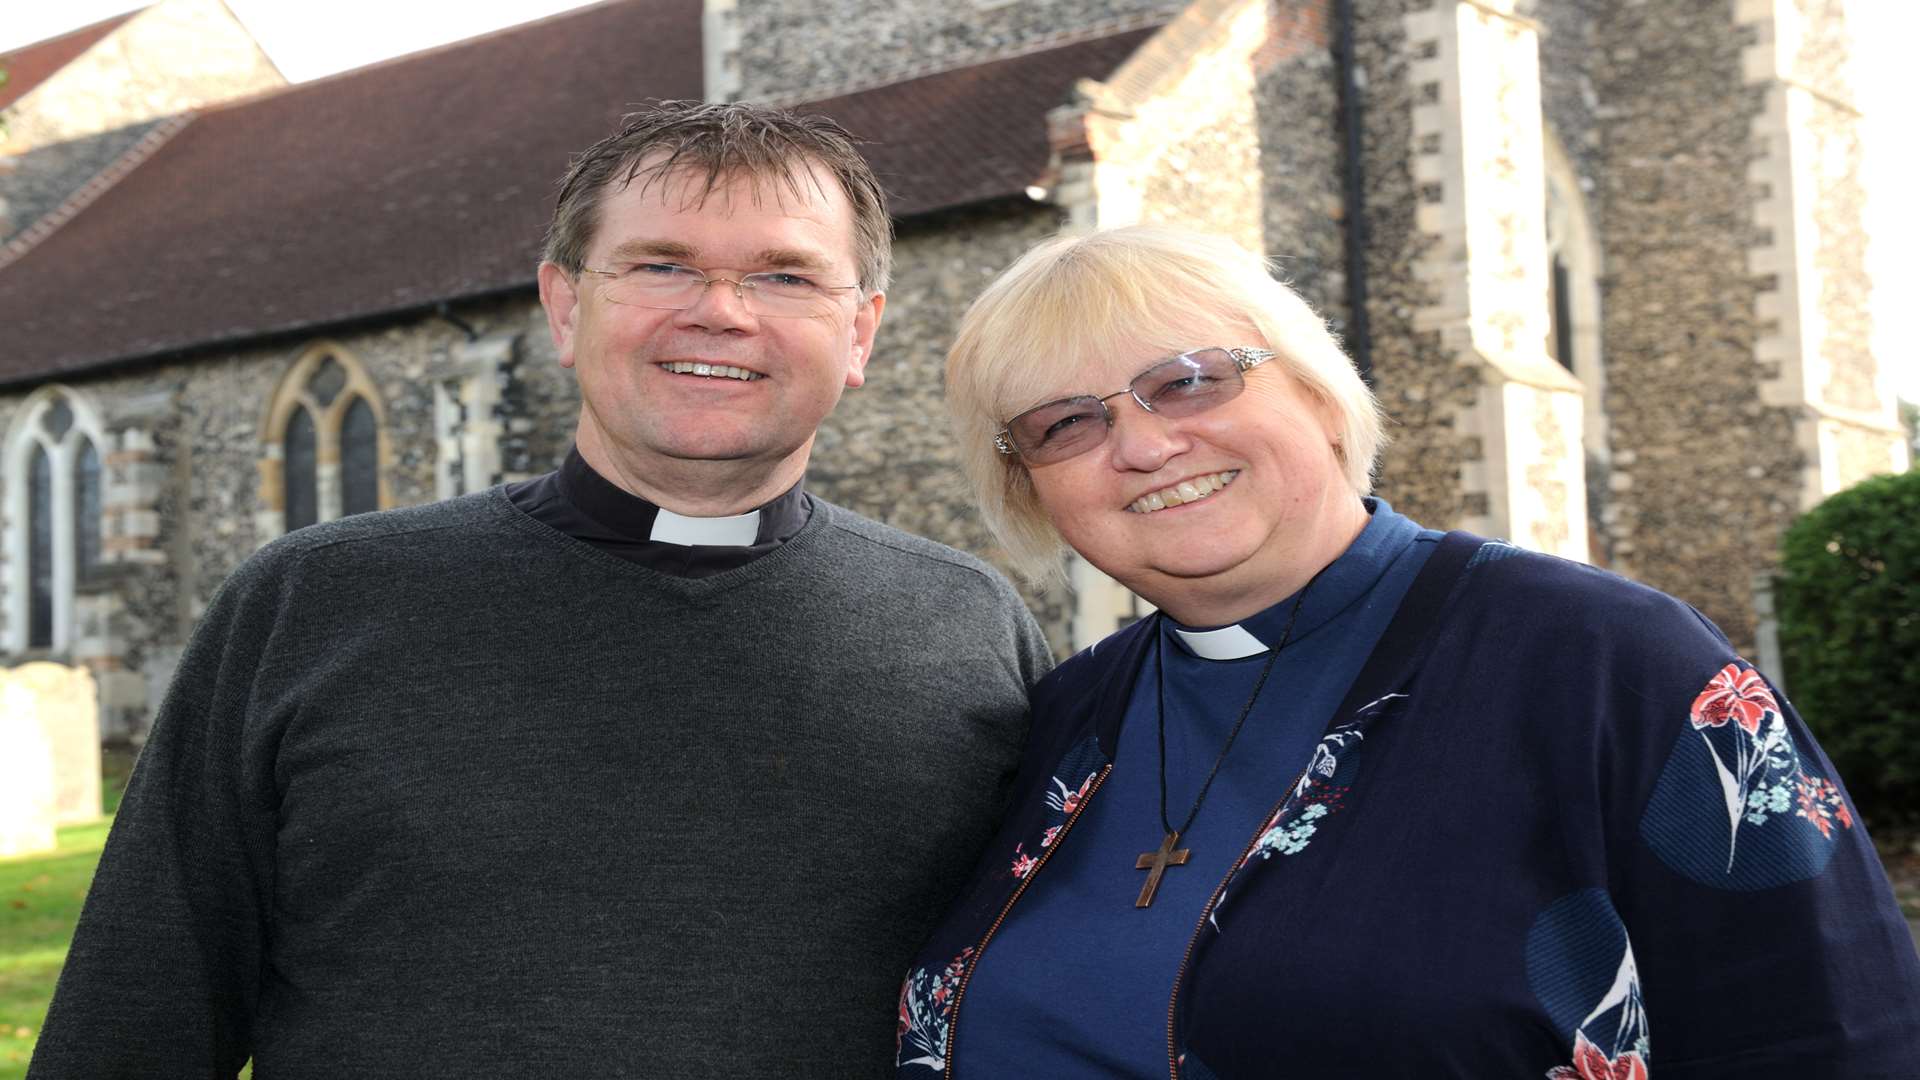 Husband and Wife Andrew and Carol both ordained deacons and serve in neighbouring parishes, in churches of the same name.